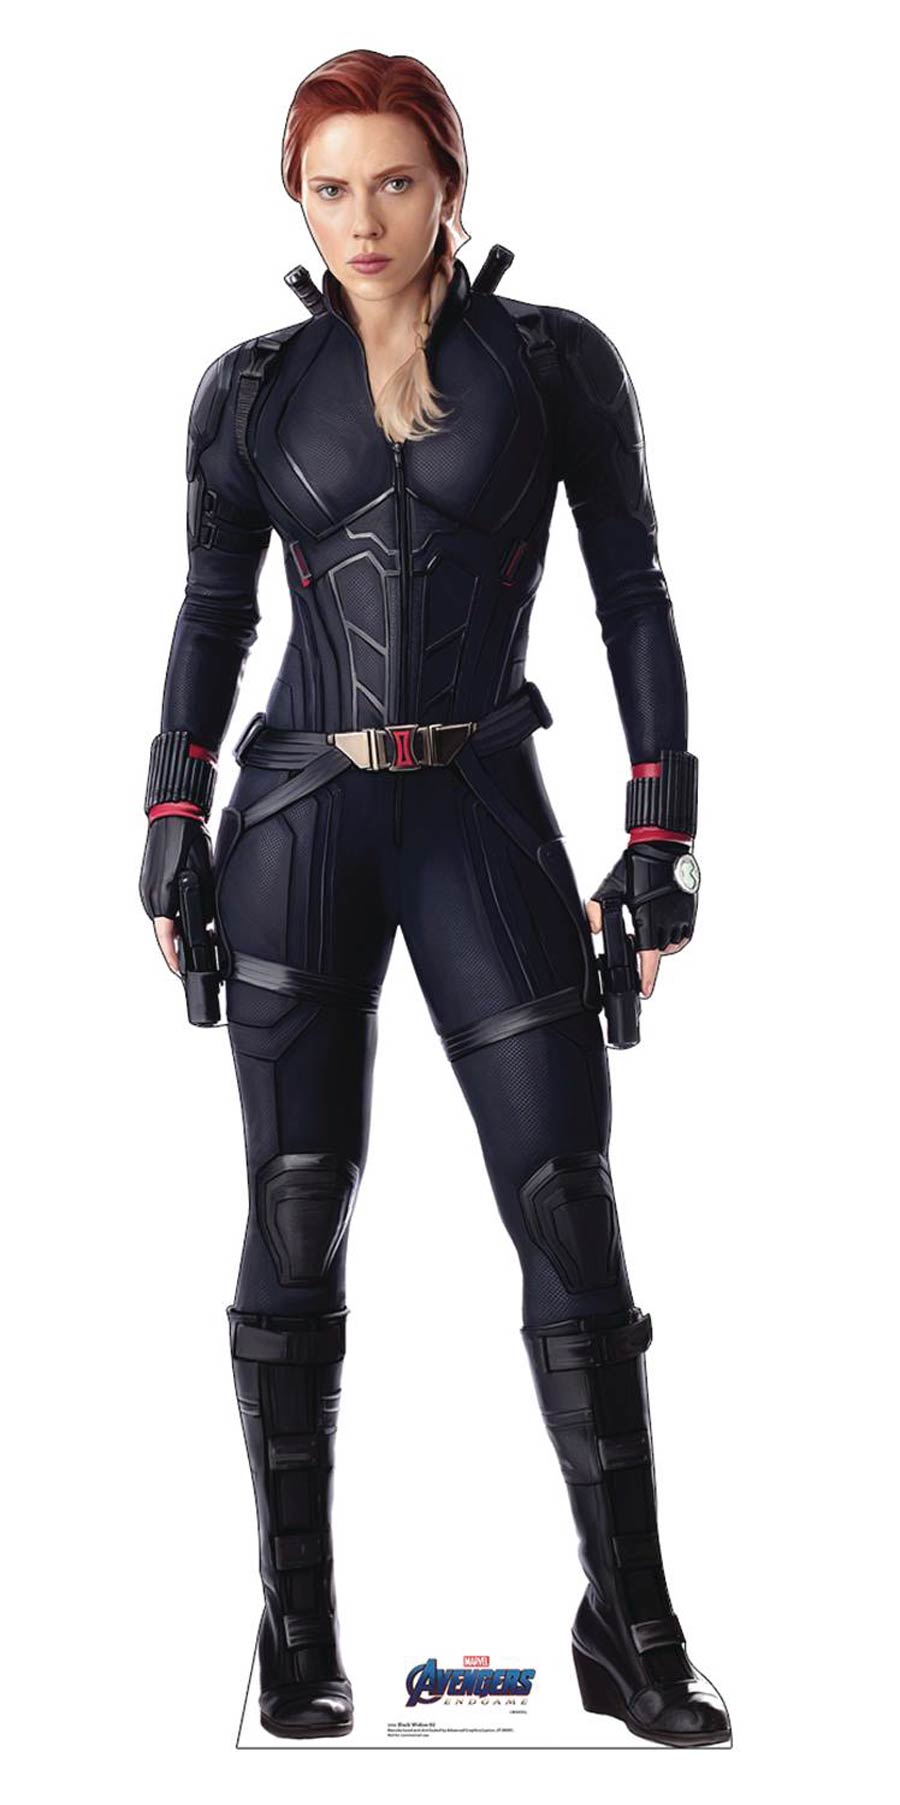 Avengers Endgame Life-Size Stand-Up - Black Widow